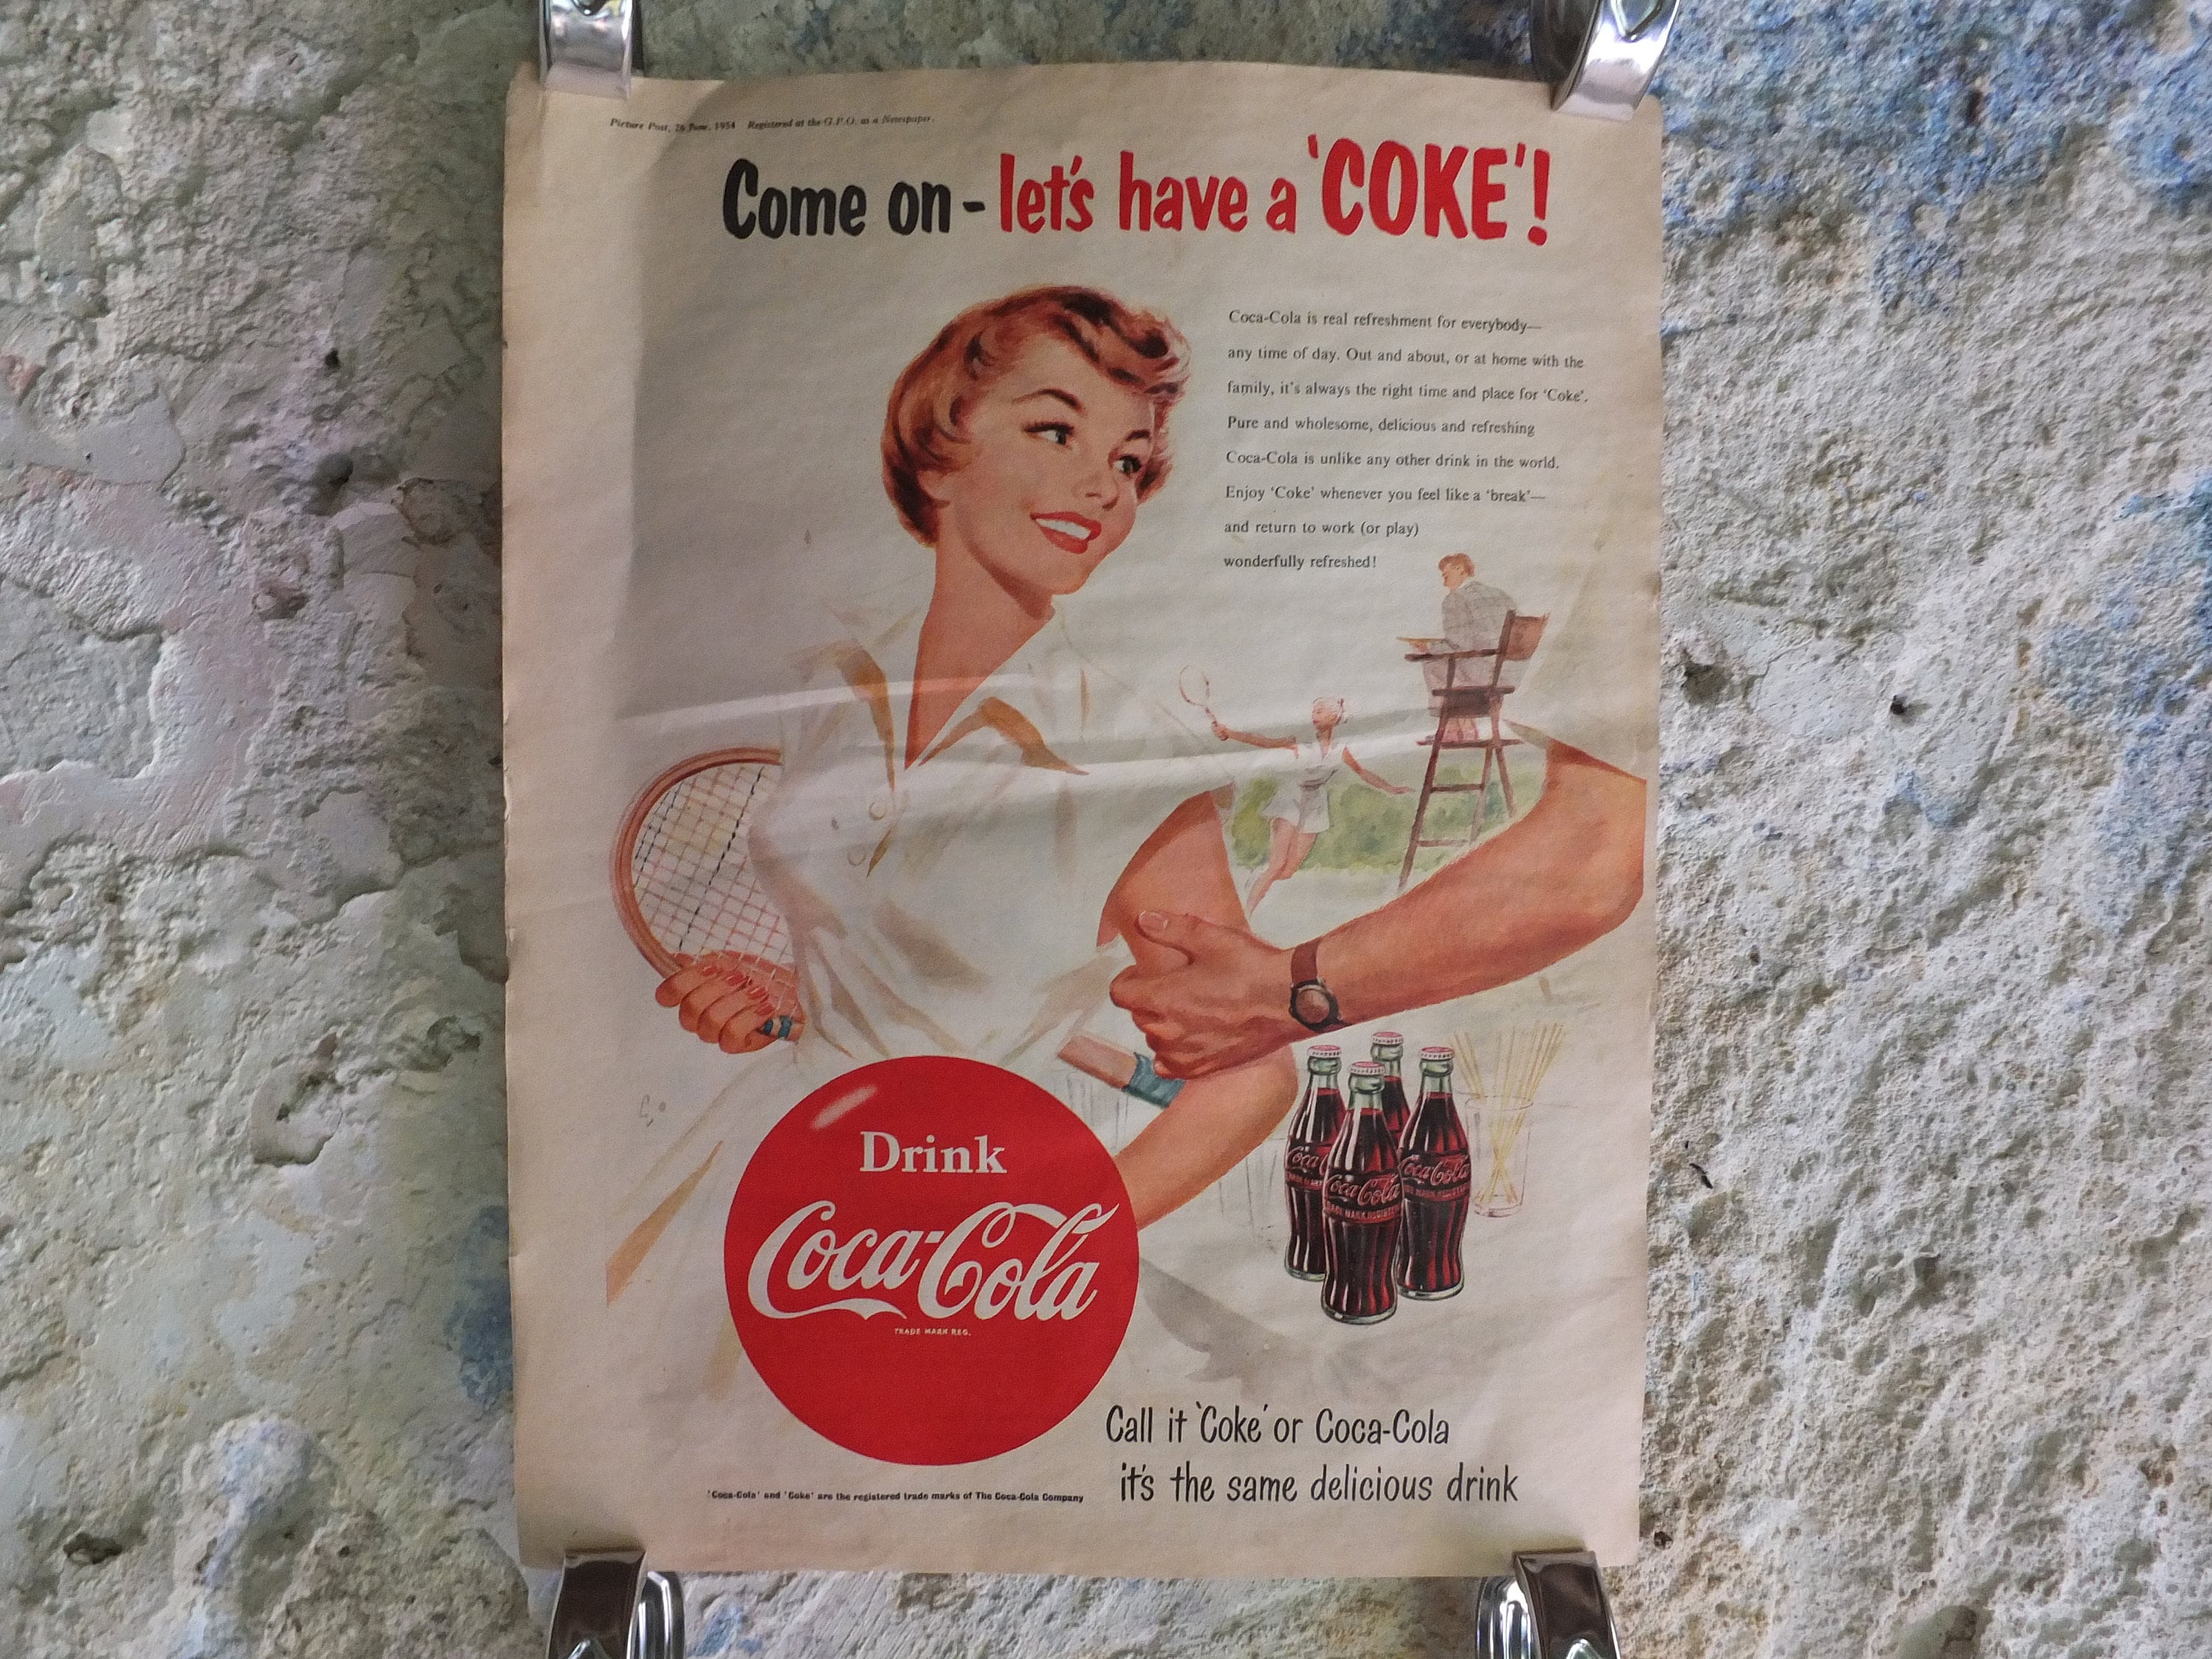 New arrival today: Coca Cola - Five Star Trading Holland